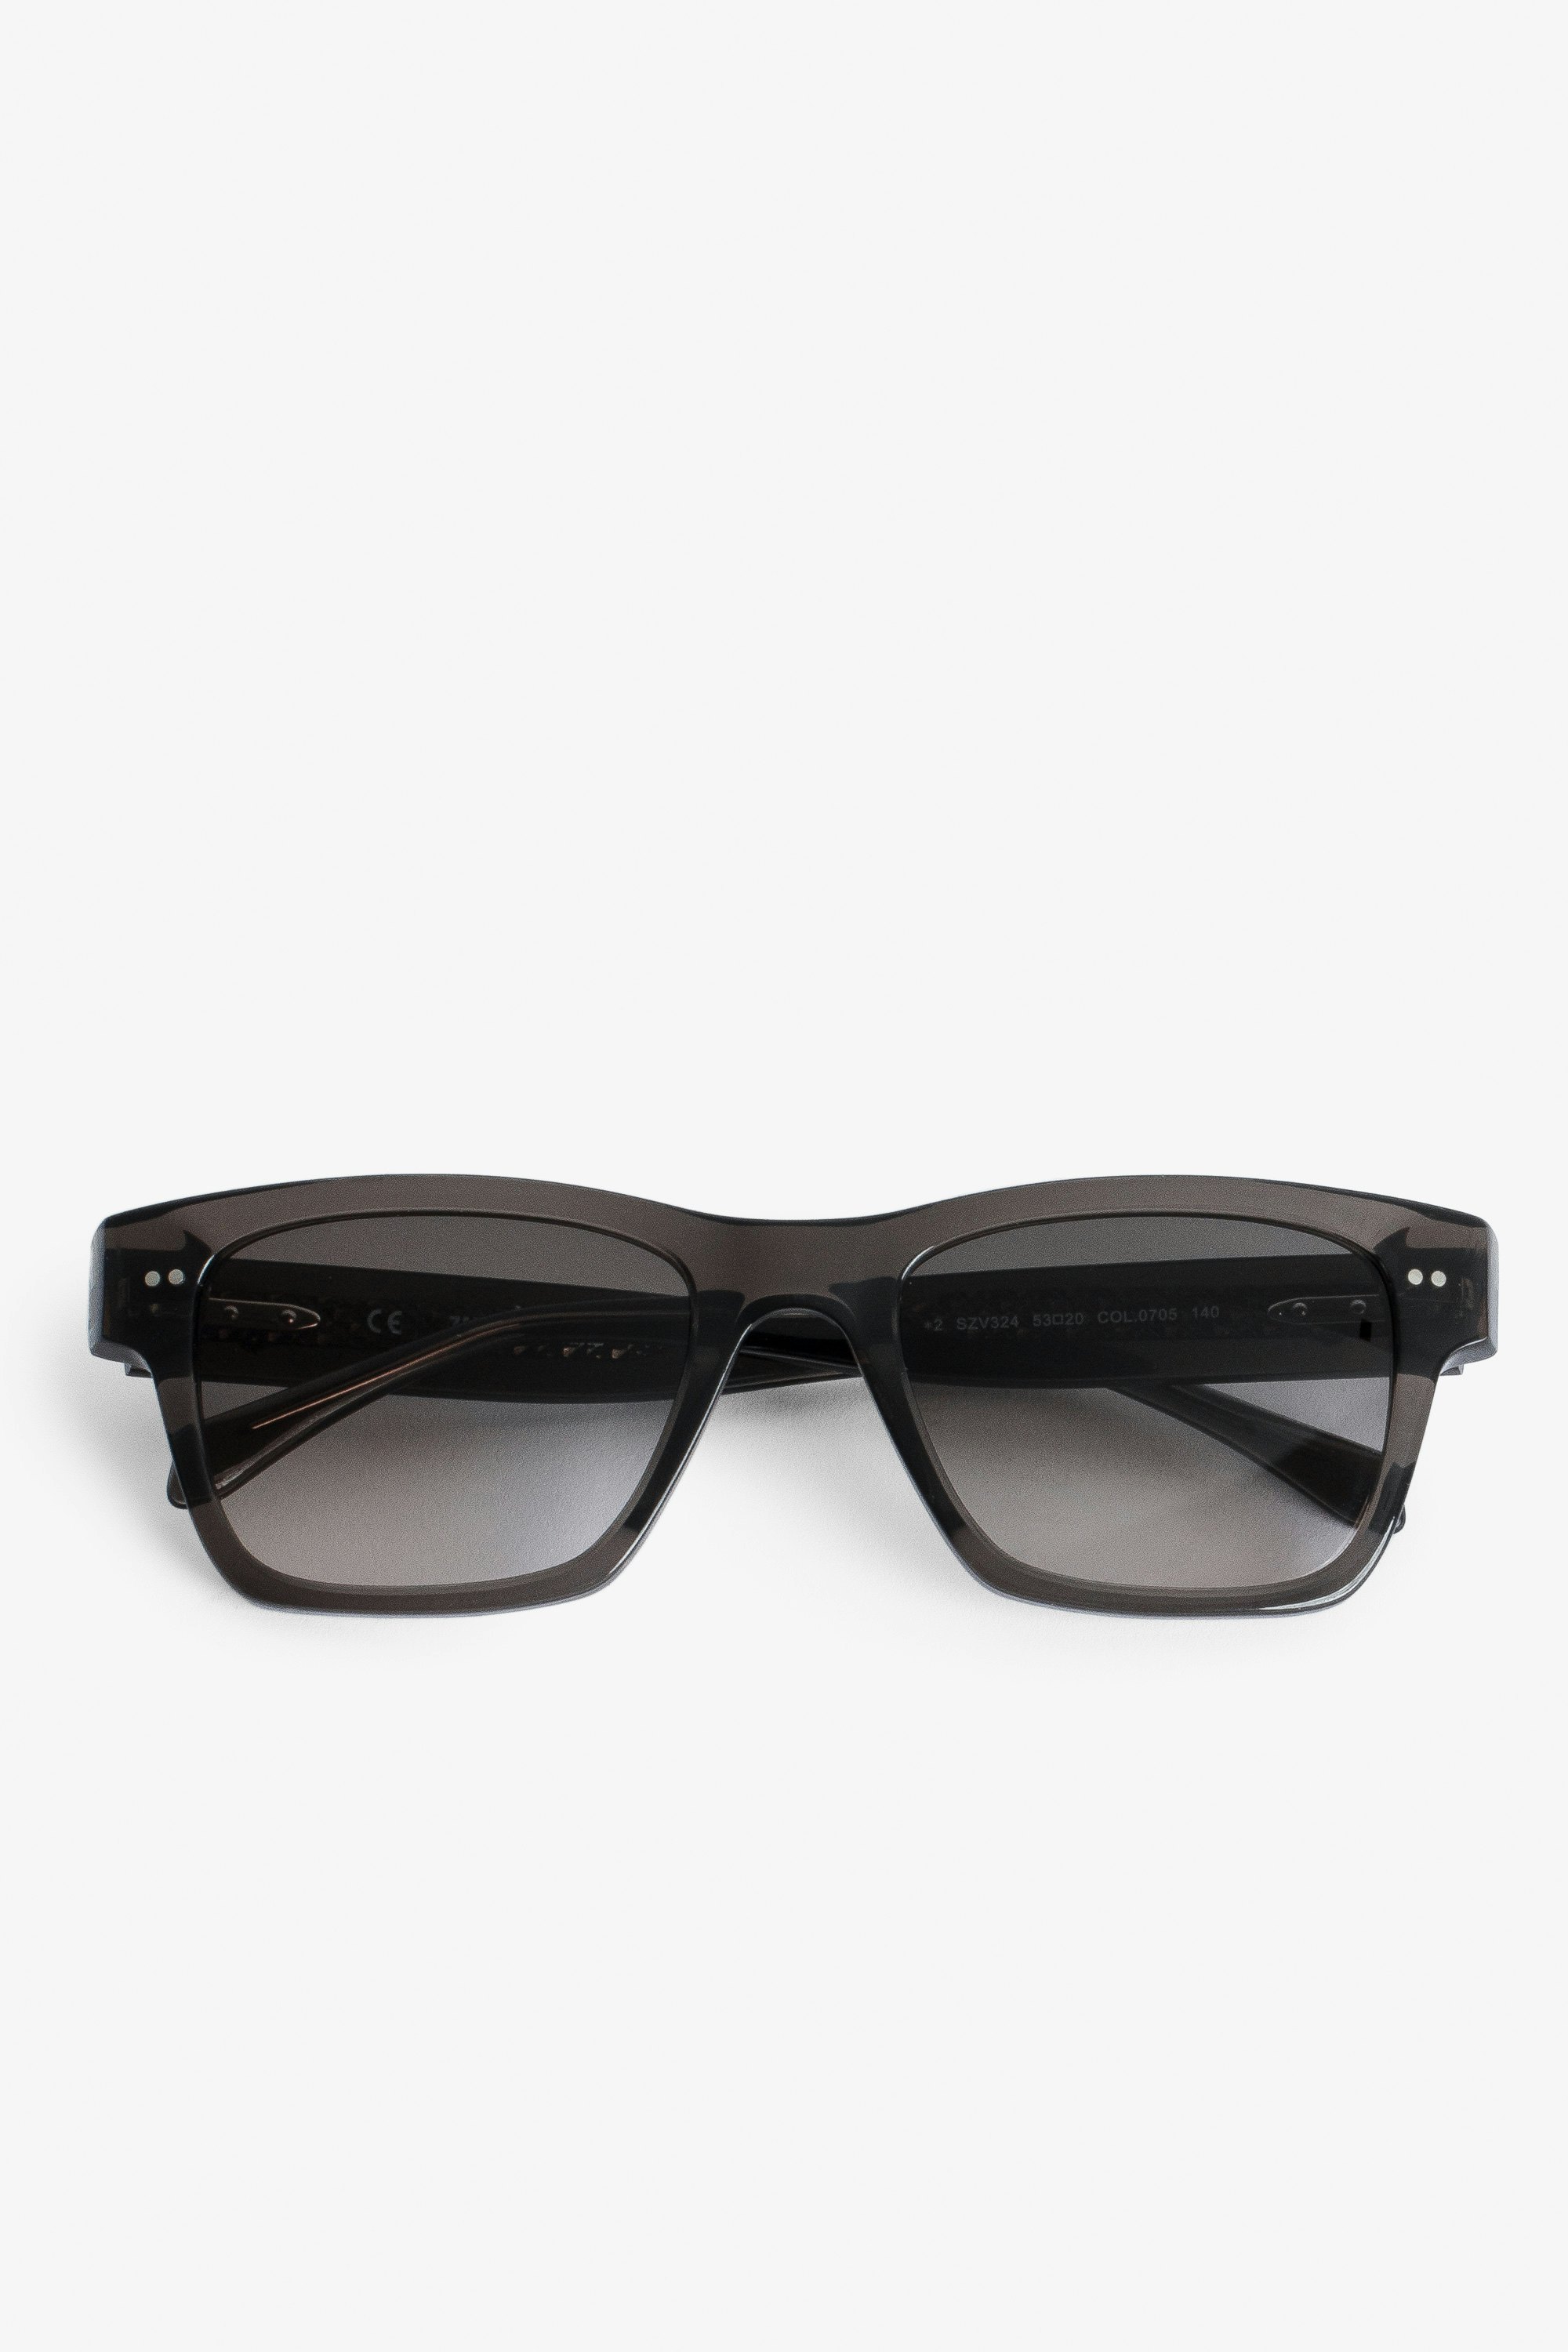 Transparent Wings サングラス Black acetate sunglasses with wing detailing on temples and smoked lenses